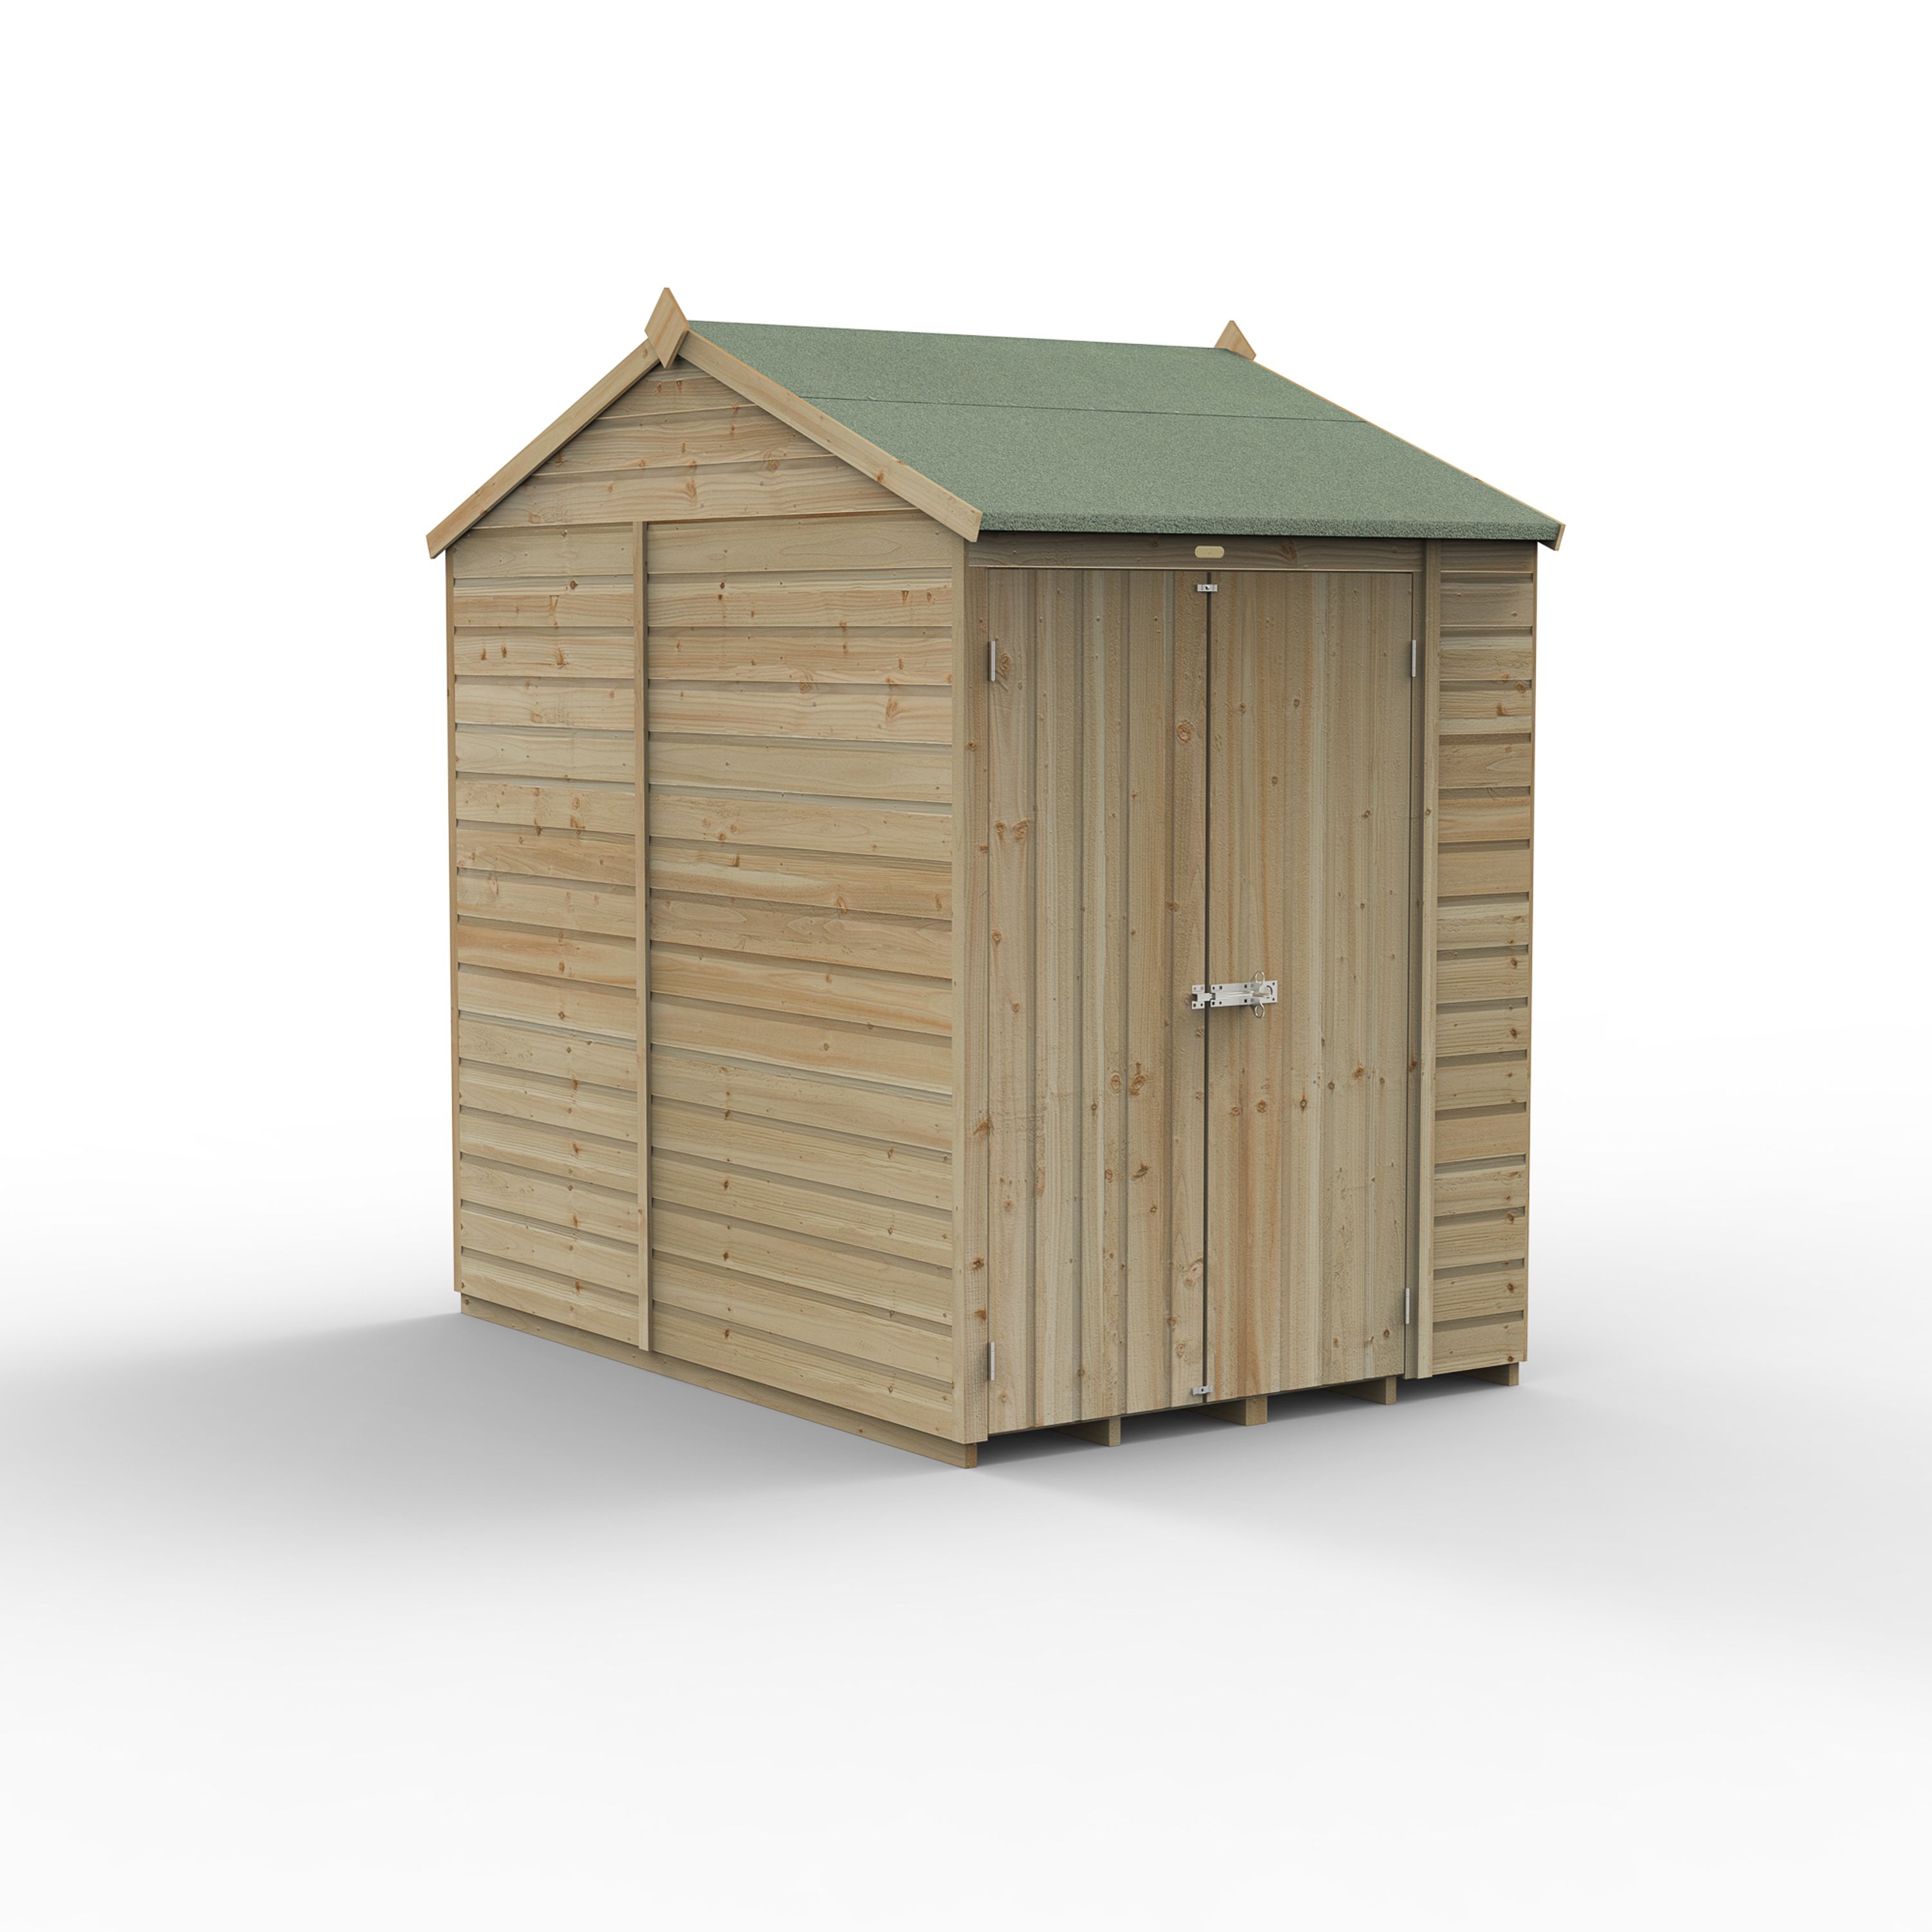 Forest Garden Beckwood 7x5 ft Reverse apex Natural timber Wooden 2 door Shed with floor